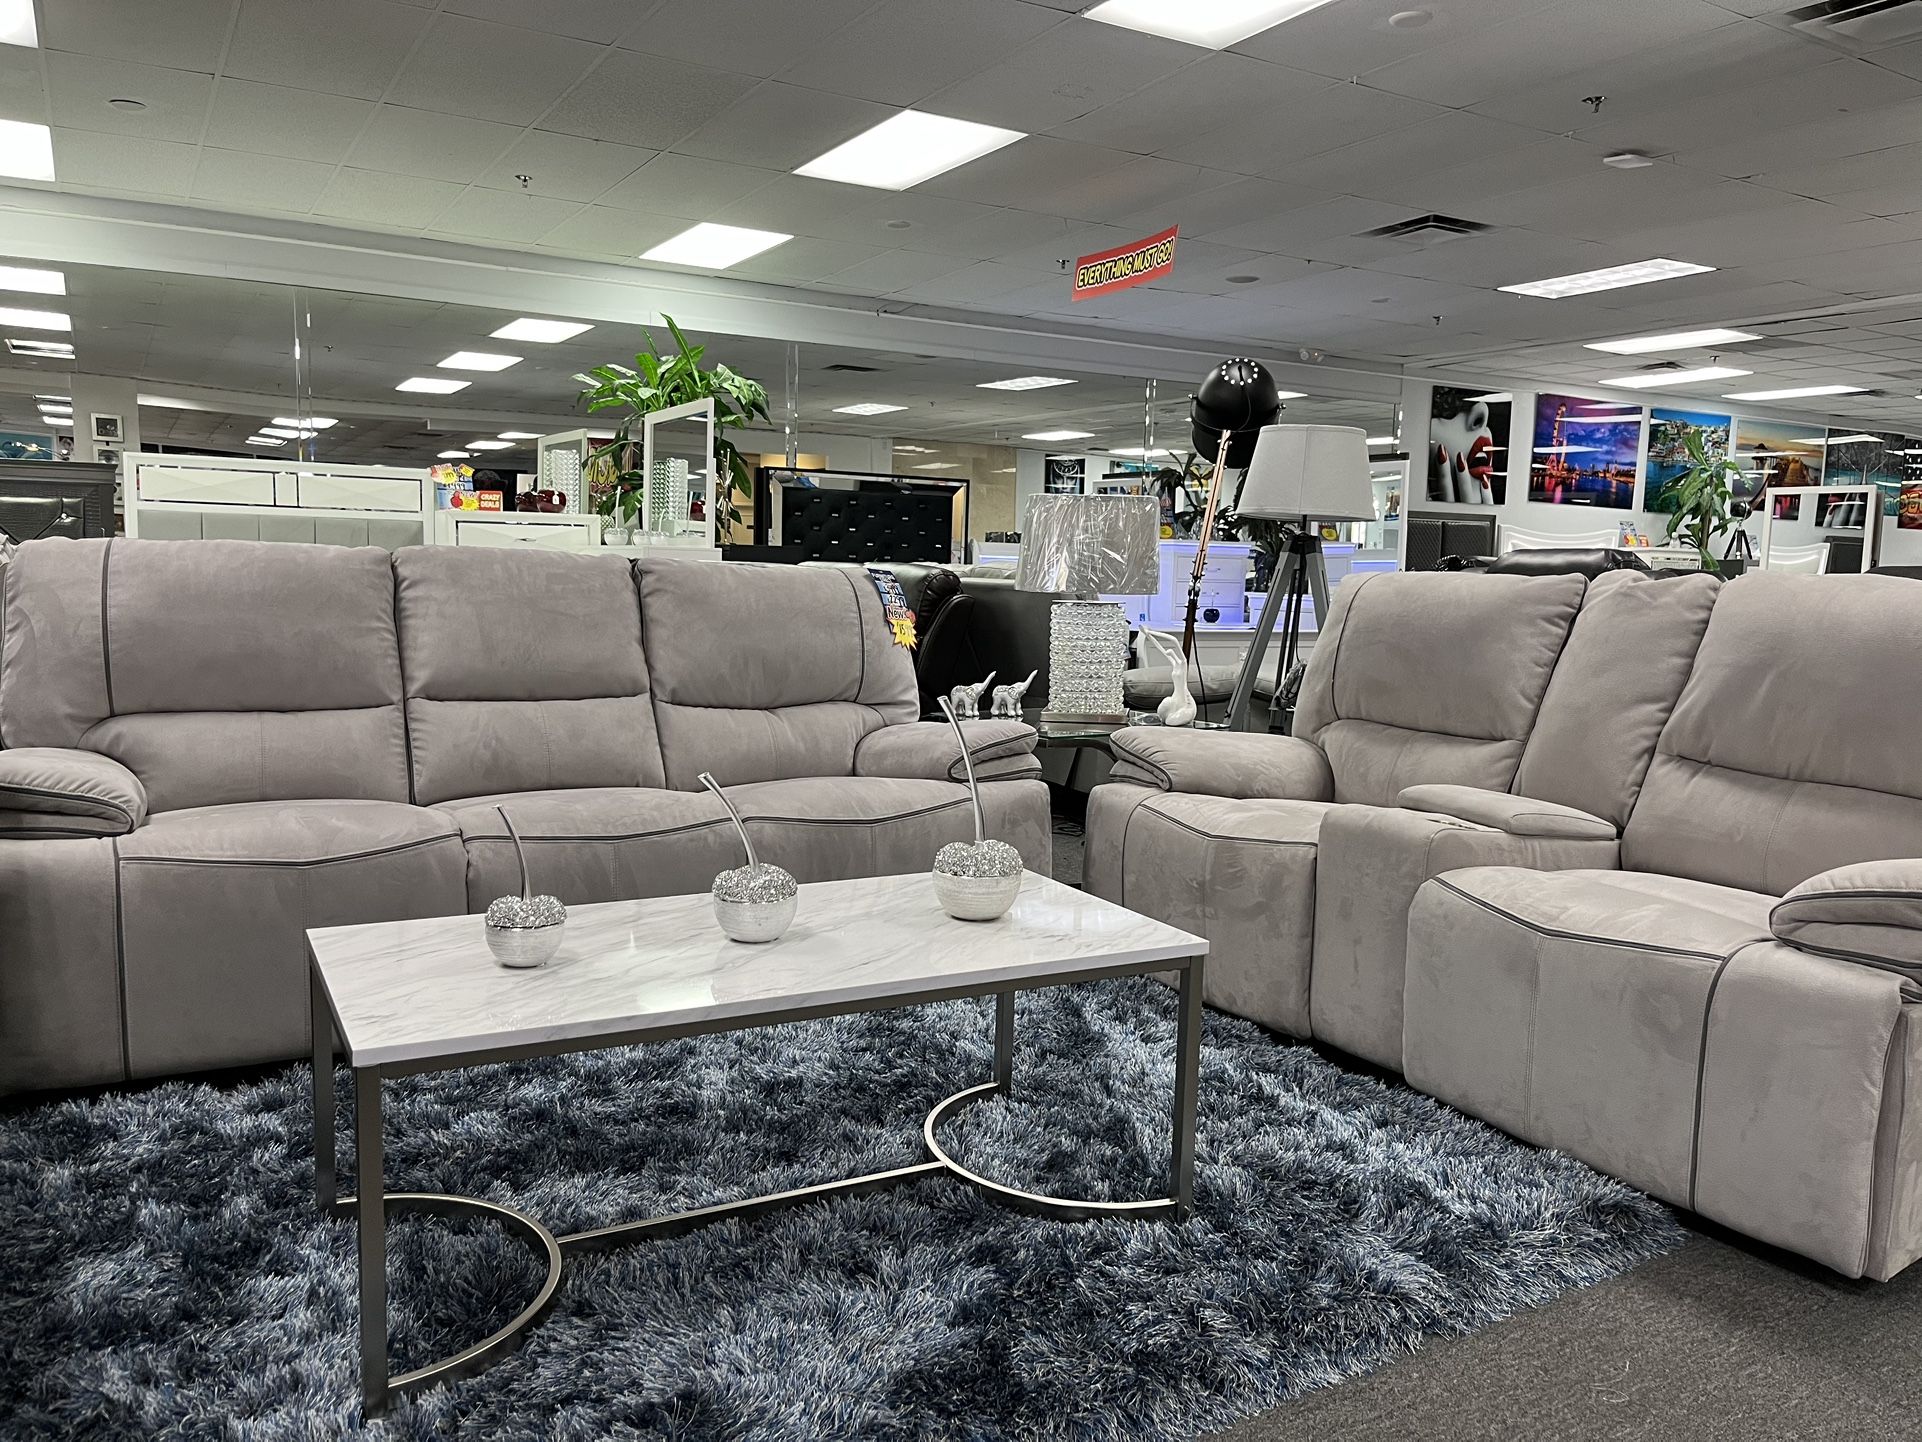 🤩🤩 Living Room Sets Well Below Retail!! Power Sofa & Love Seat W/performance Micro-Fiber !! While Supplies Last $1399!! 🤩🤩